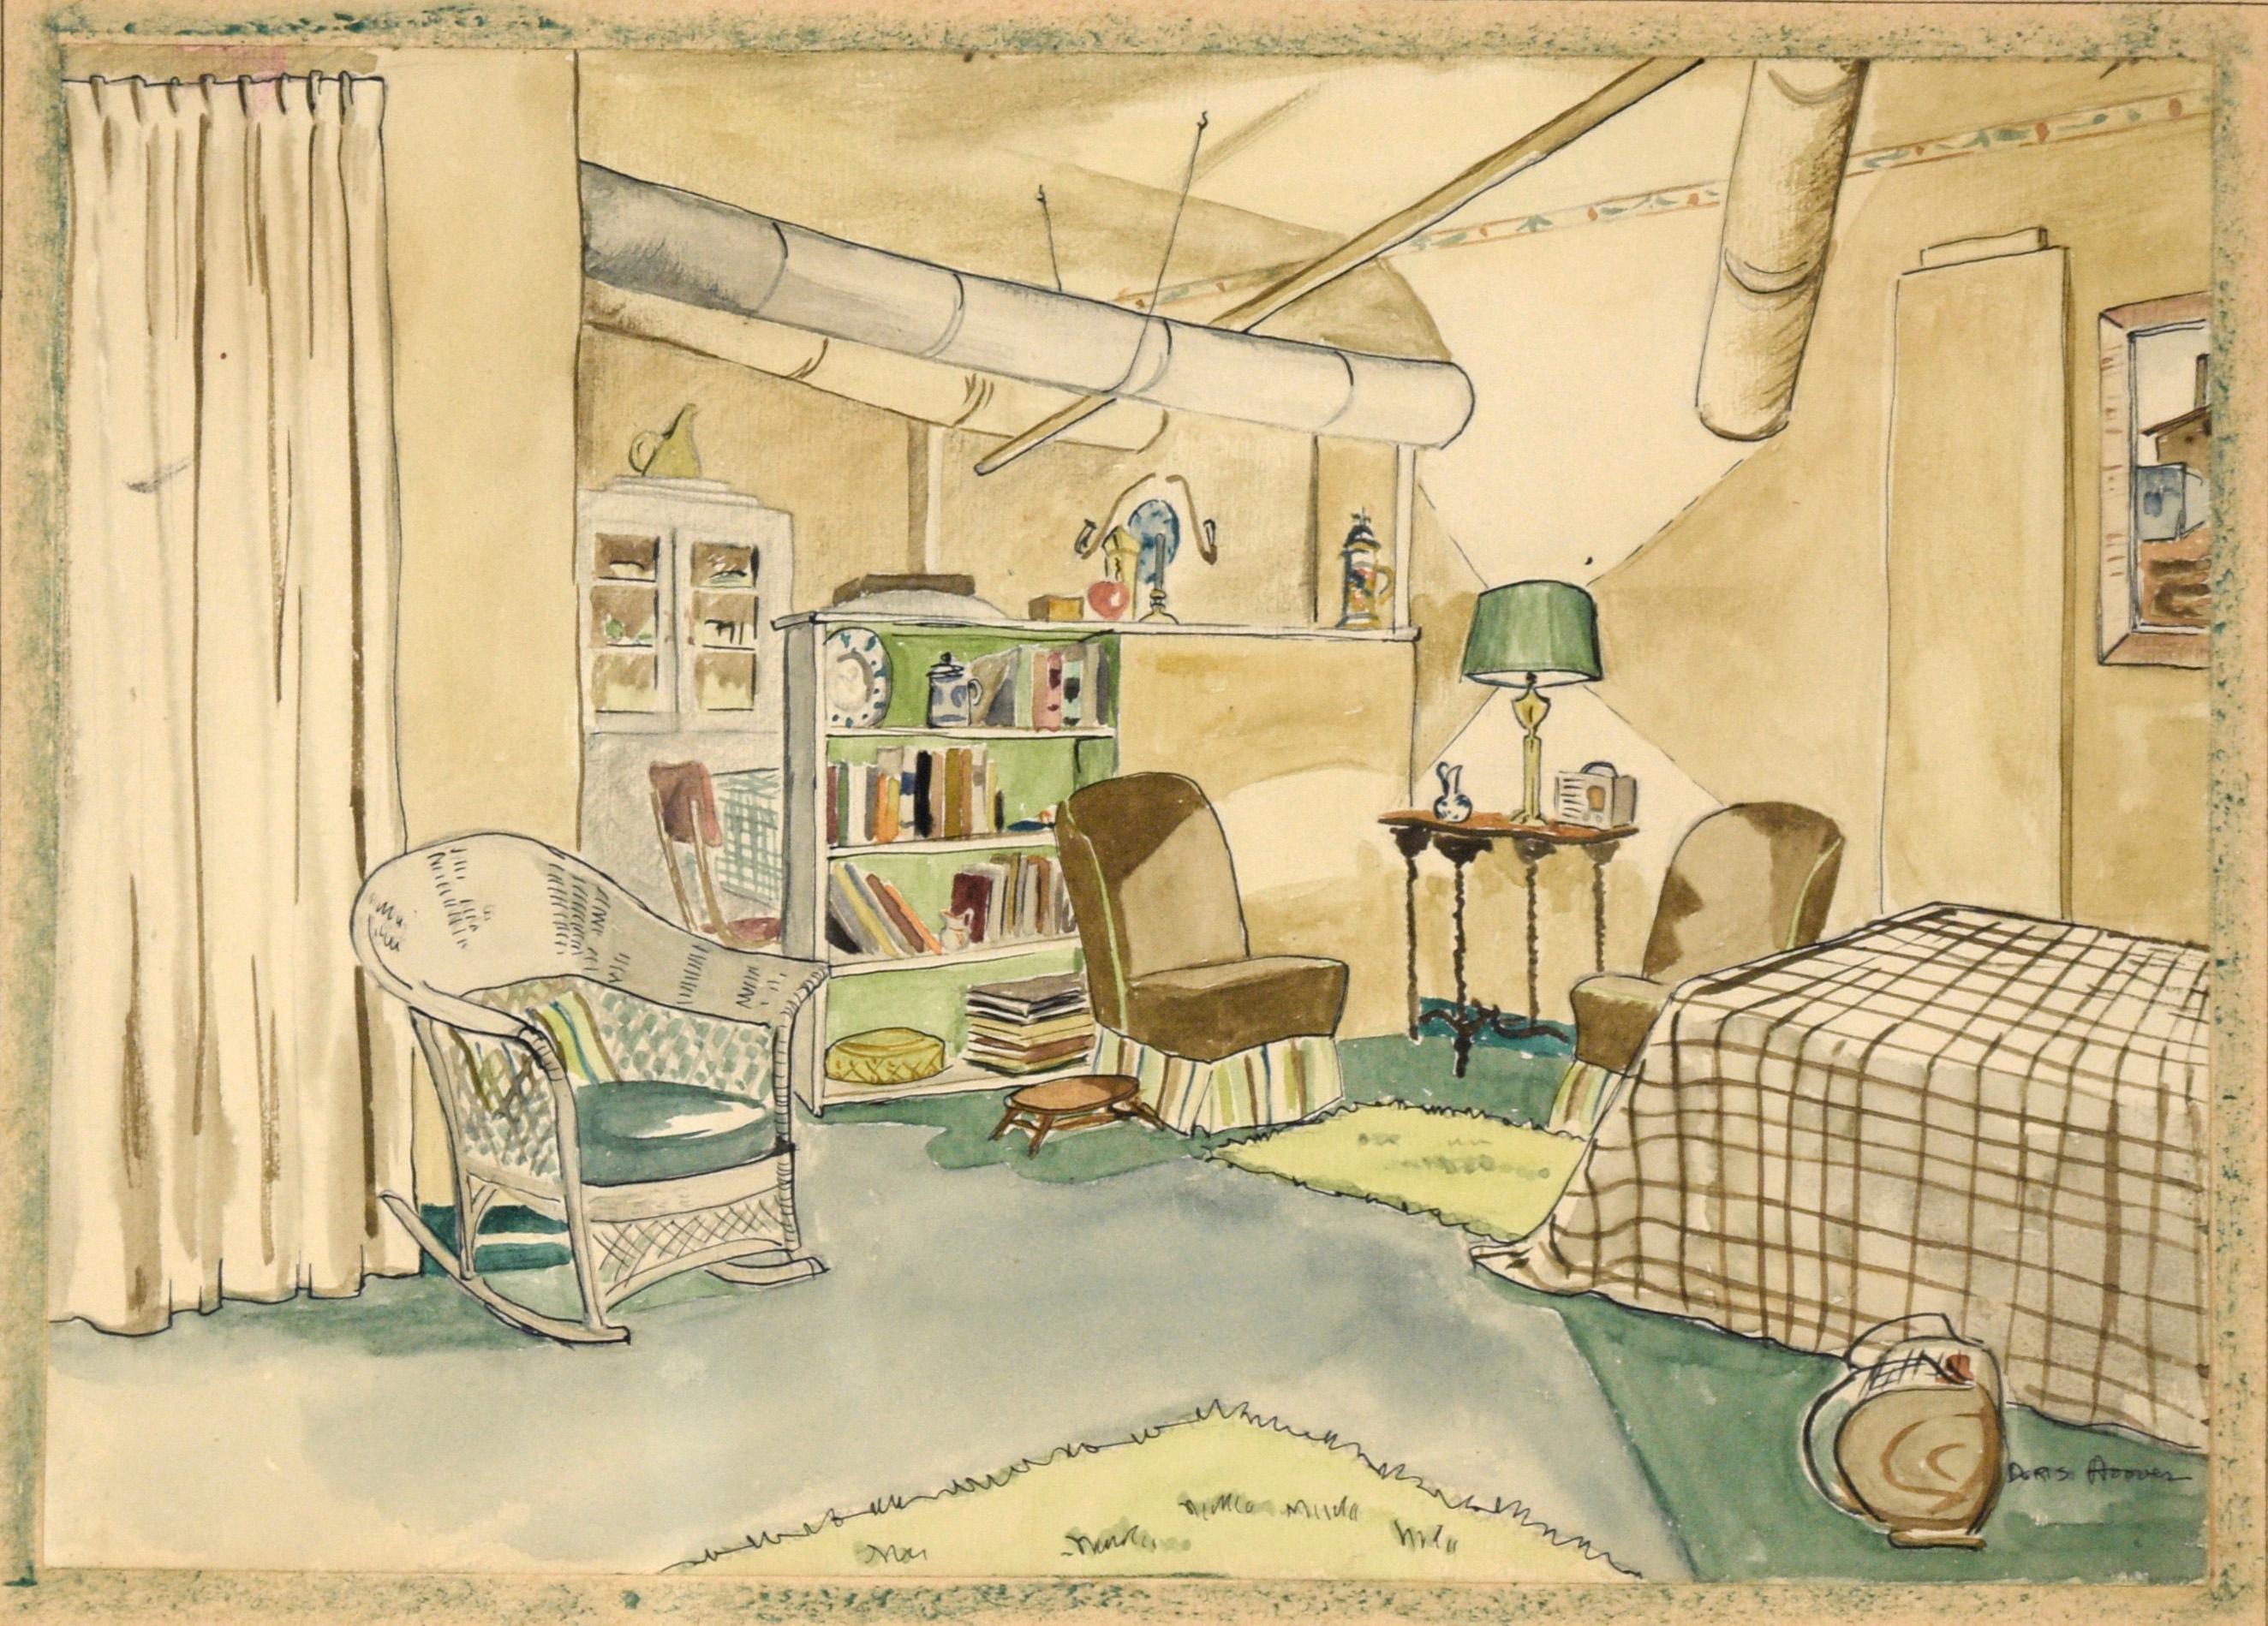 Apartment Interior #2 - Watercolor and Pen on Paper - Painting by Doris Lyons Hoover